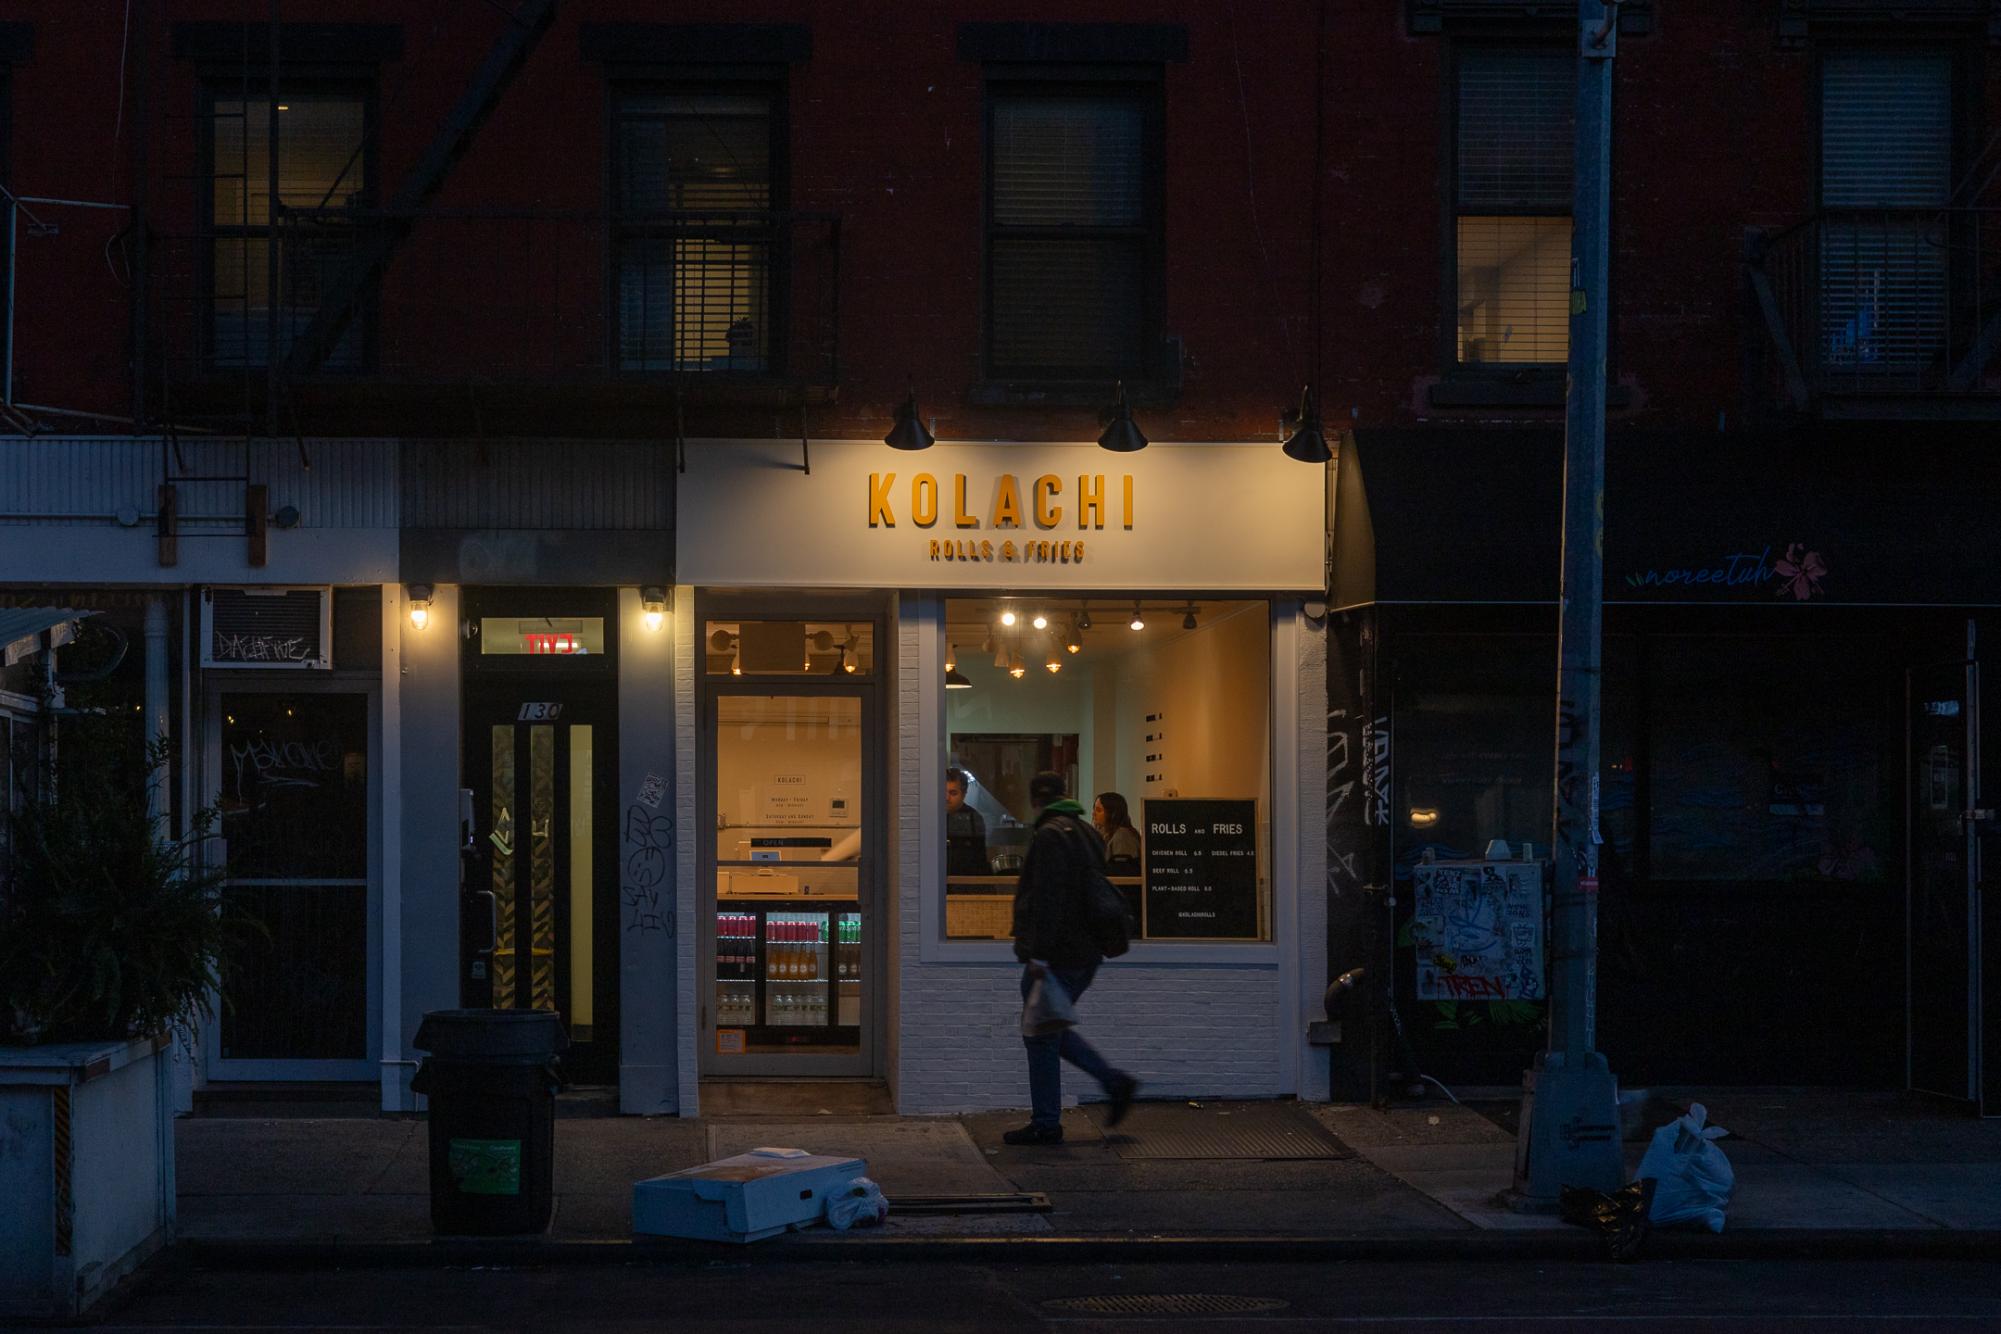 The storefront of the restaurant which has “KOLACHI” and “ROLLS AND FRIES,” written in yellow text.